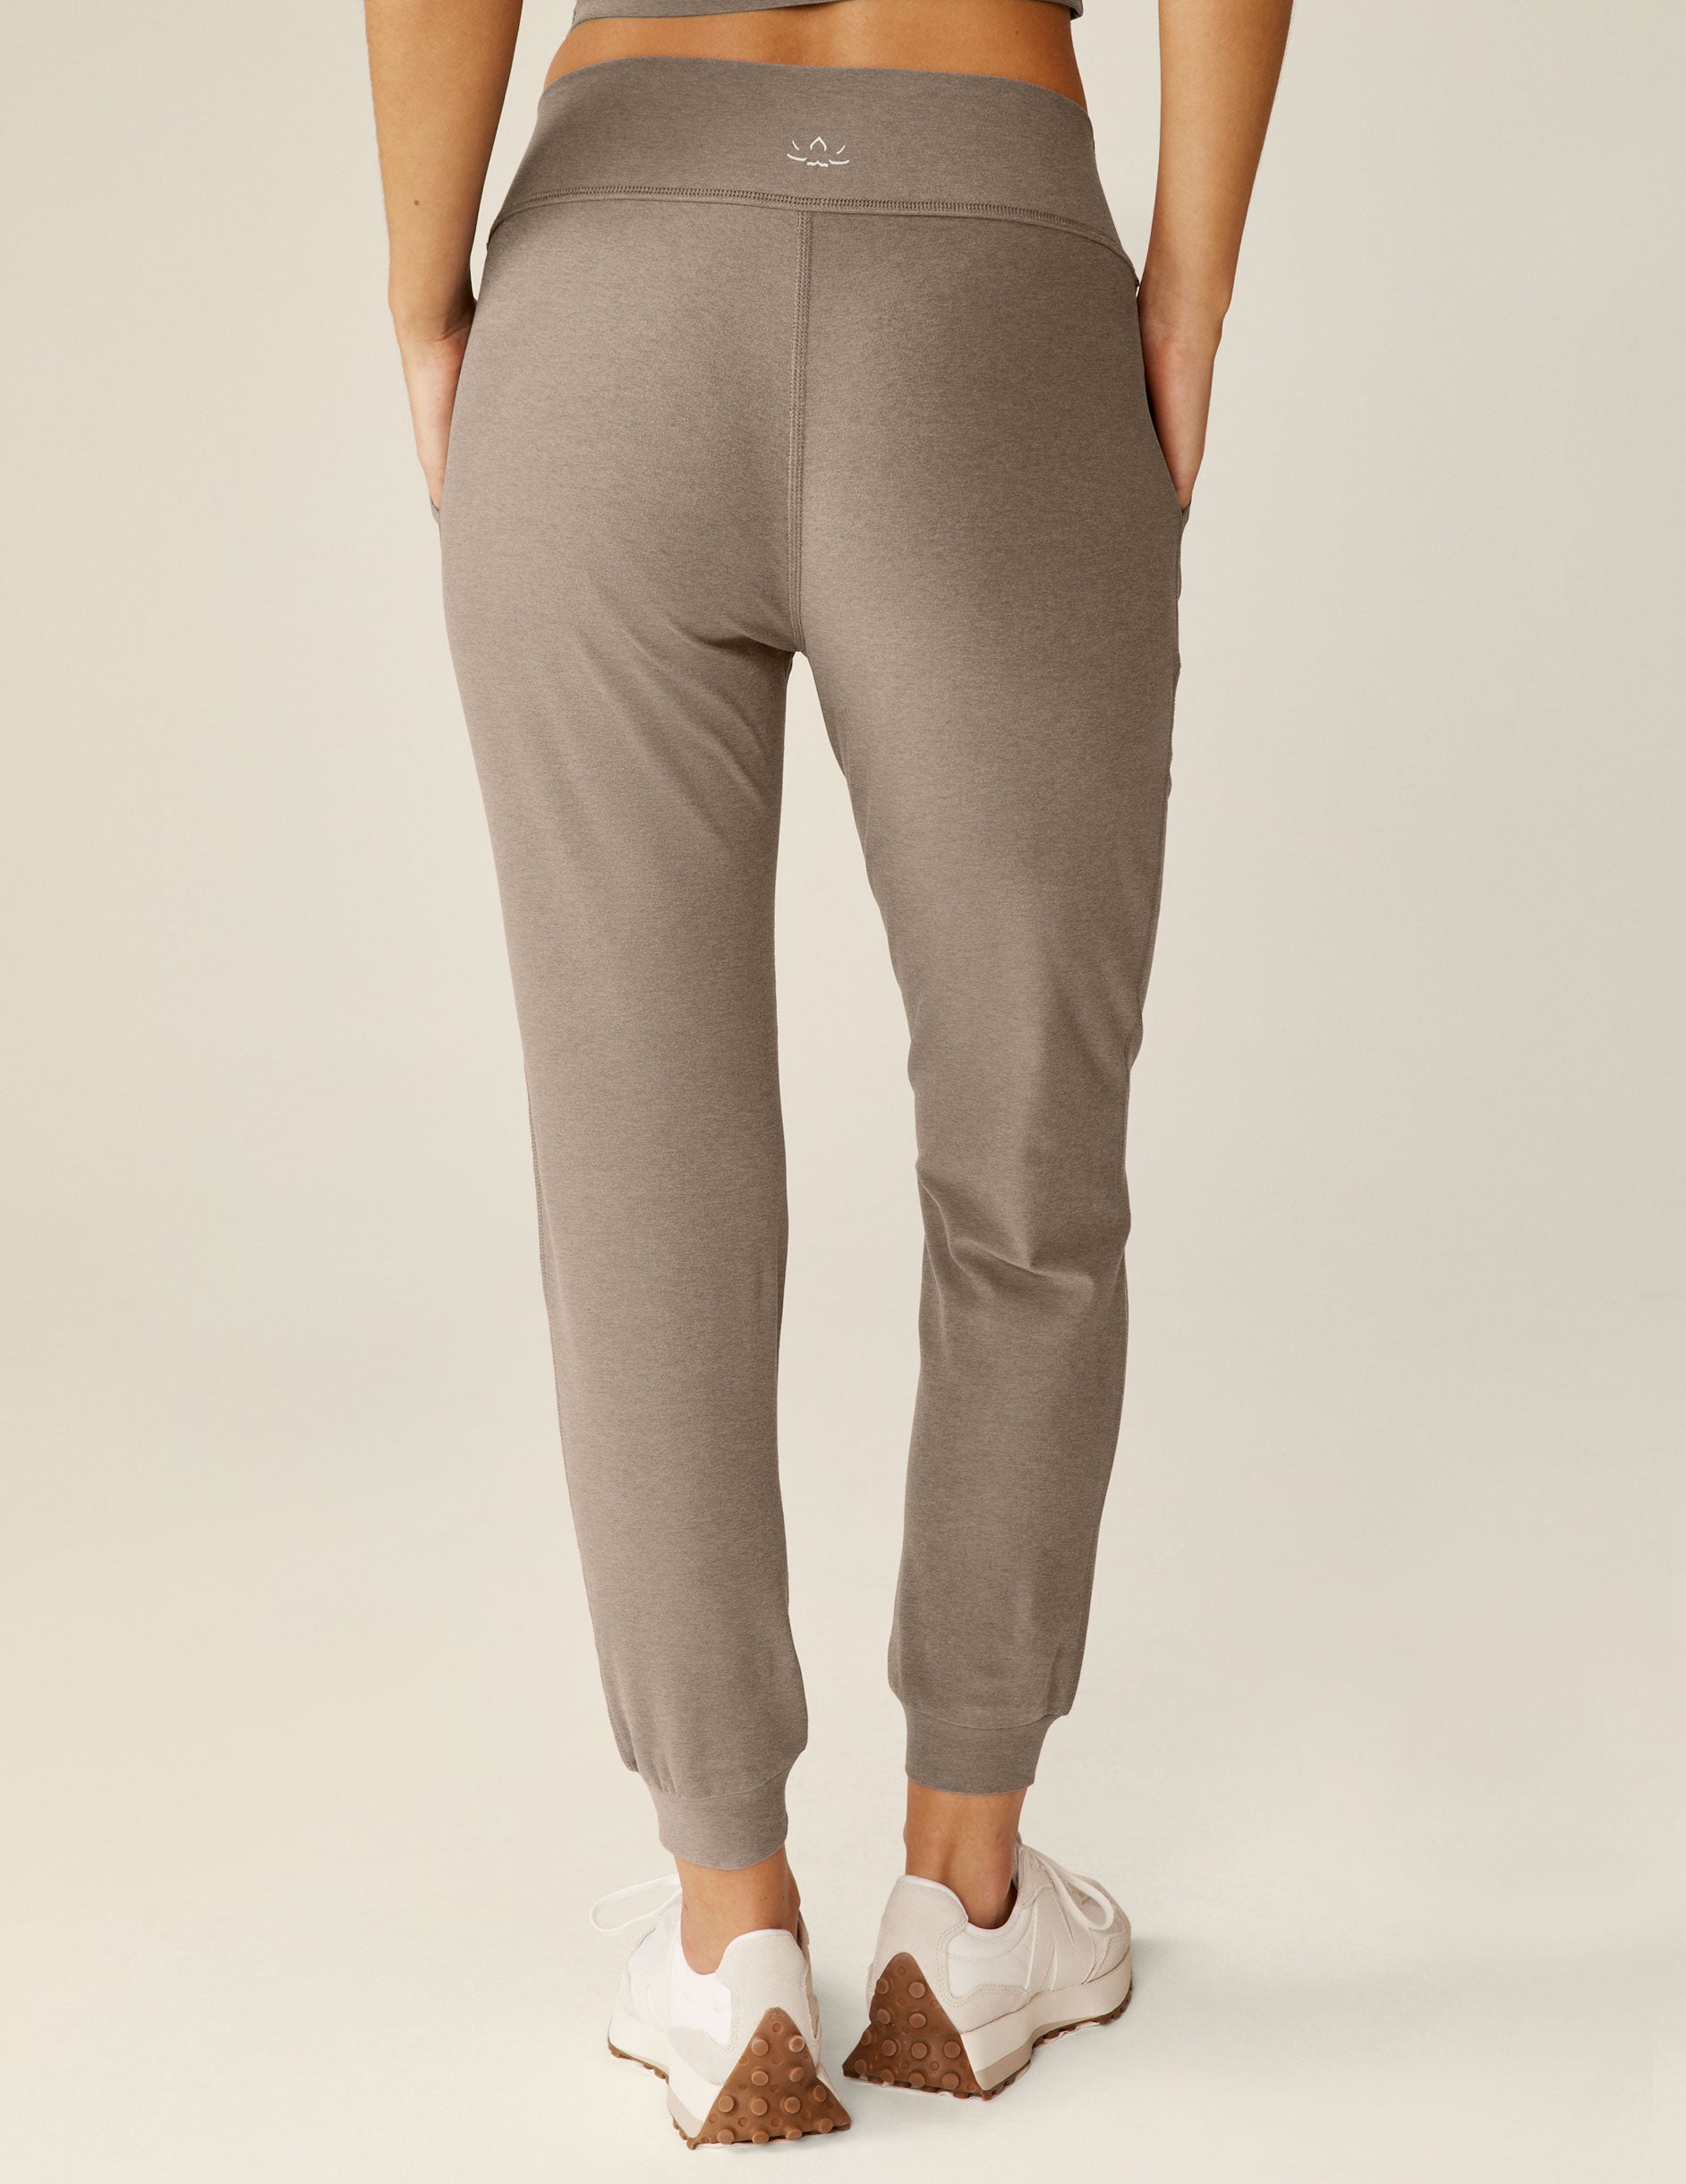 brown high-waisted joggers with pockets. 